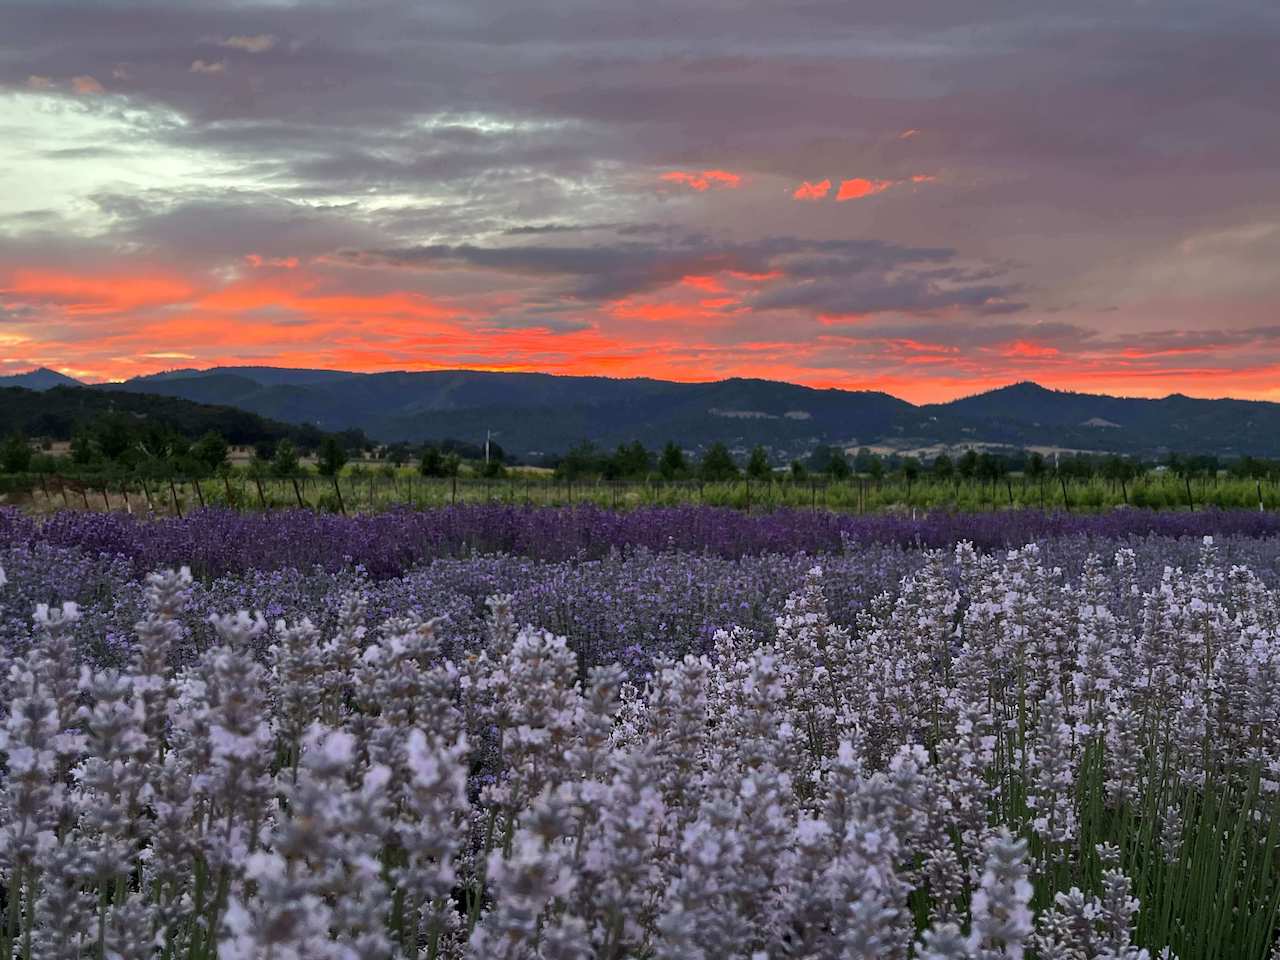 Sunset over the Lavender